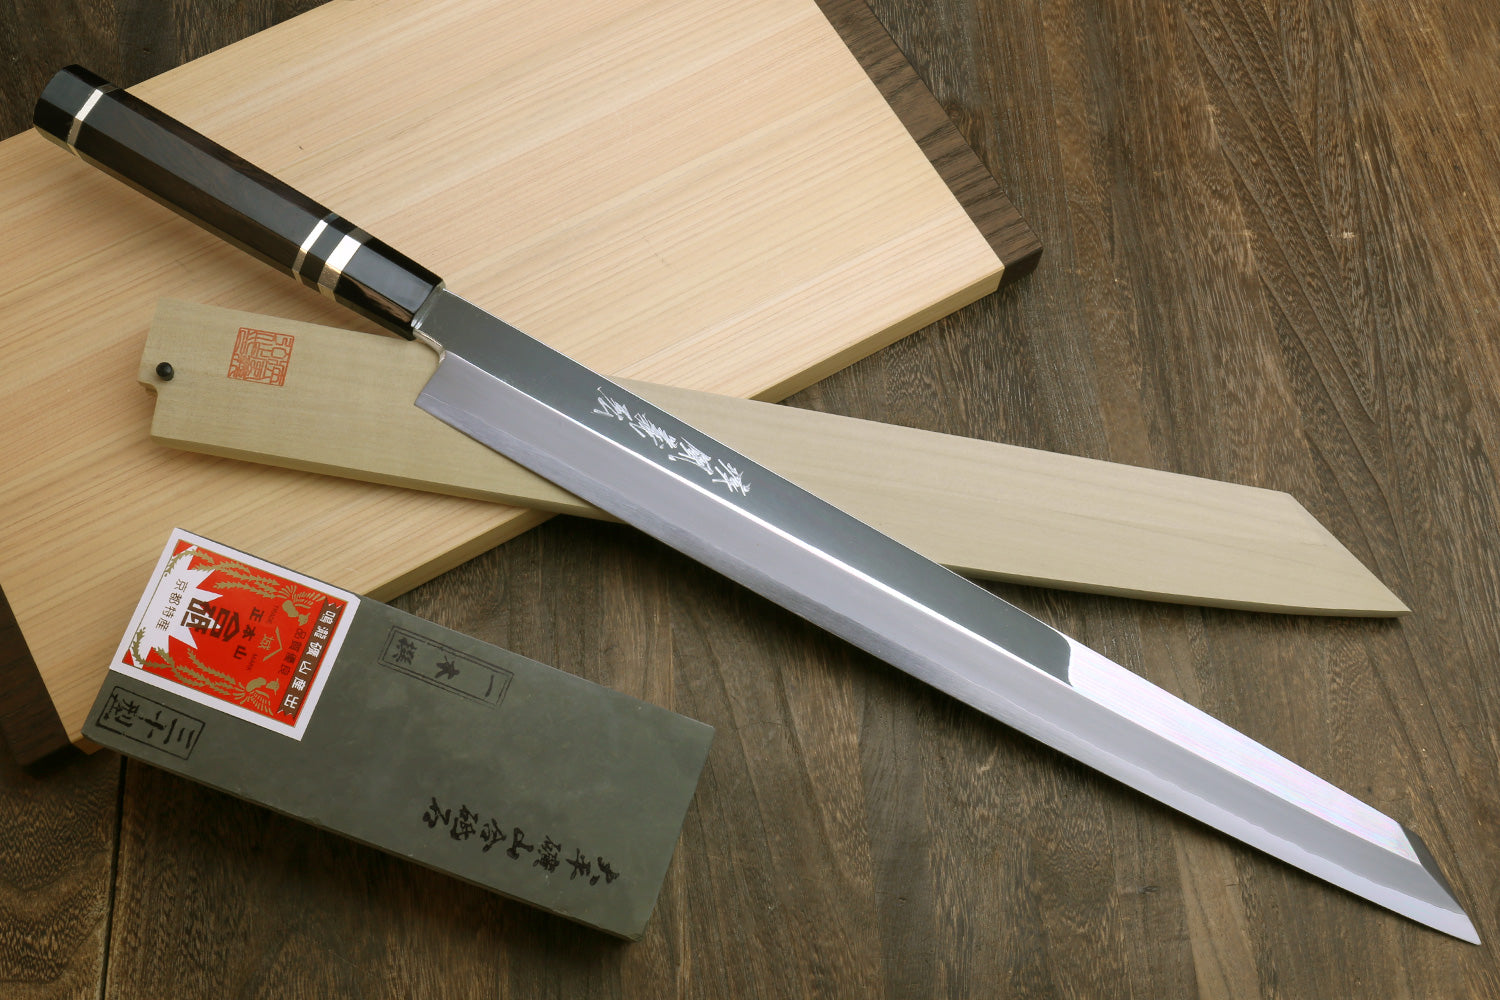 Maguro bōchō is an extremely long, highly specialized Japanese